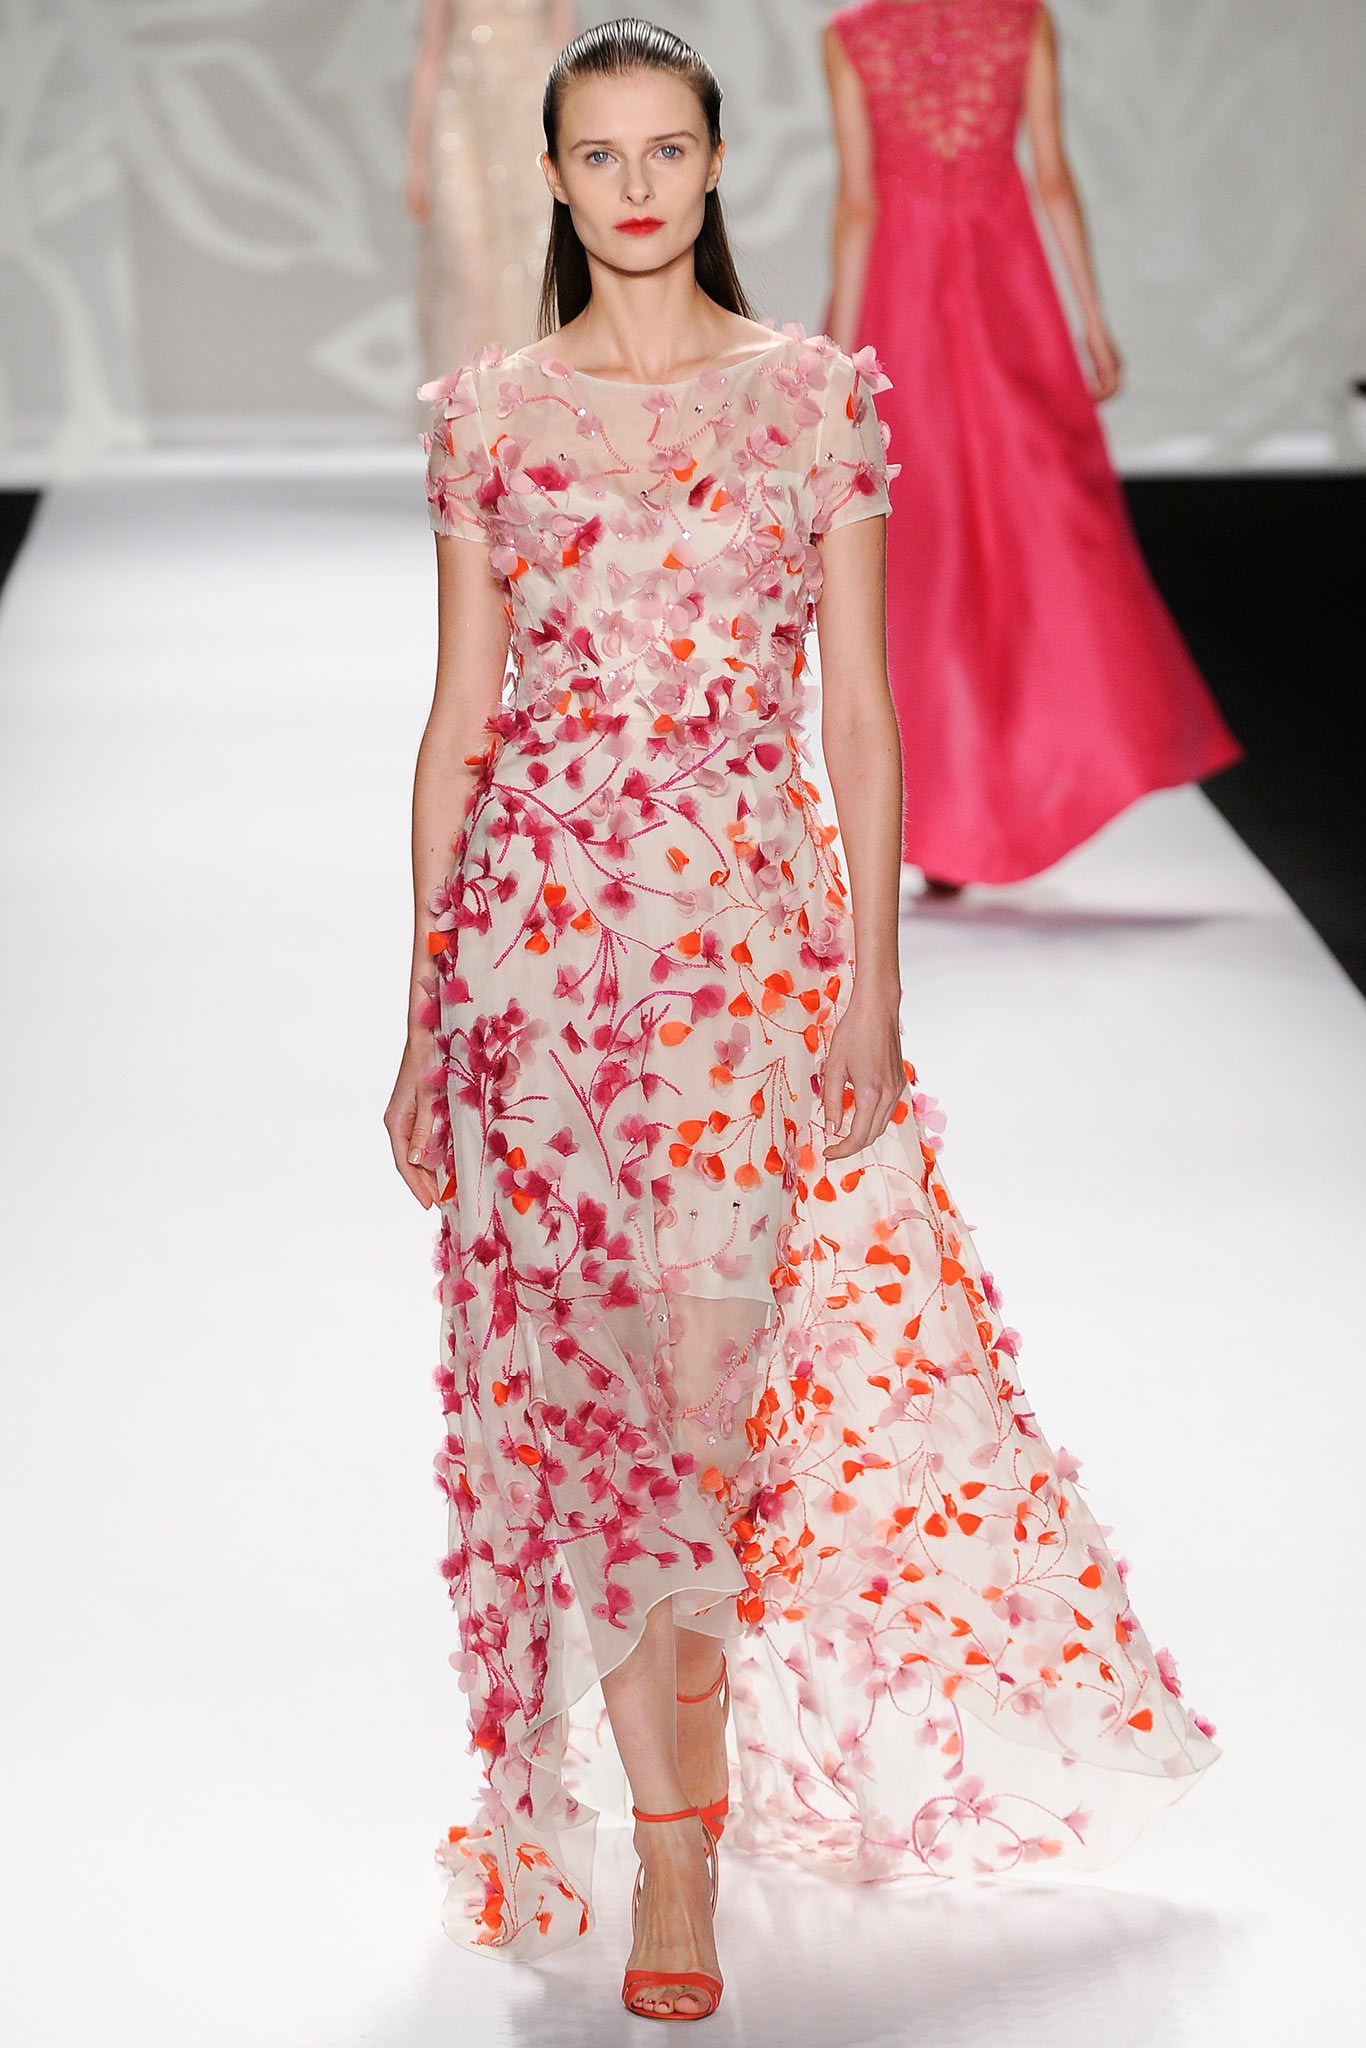 Monique Lhuillier Spring 2014 Ready-to-Wear Collection - Vogue